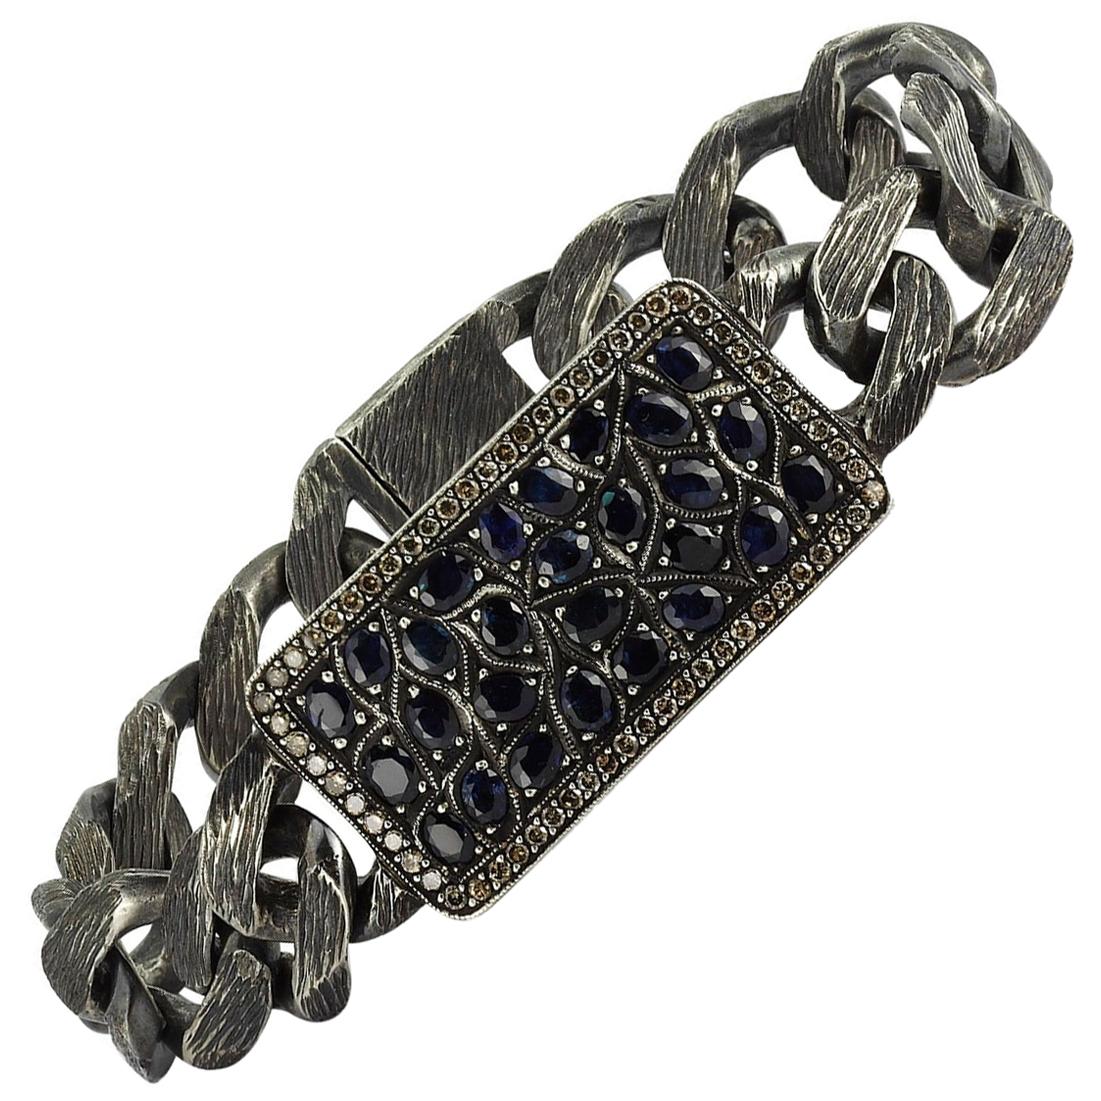 Handmade Oxidised Silver Tag Blokchain Bracalet with Pave Sapphires